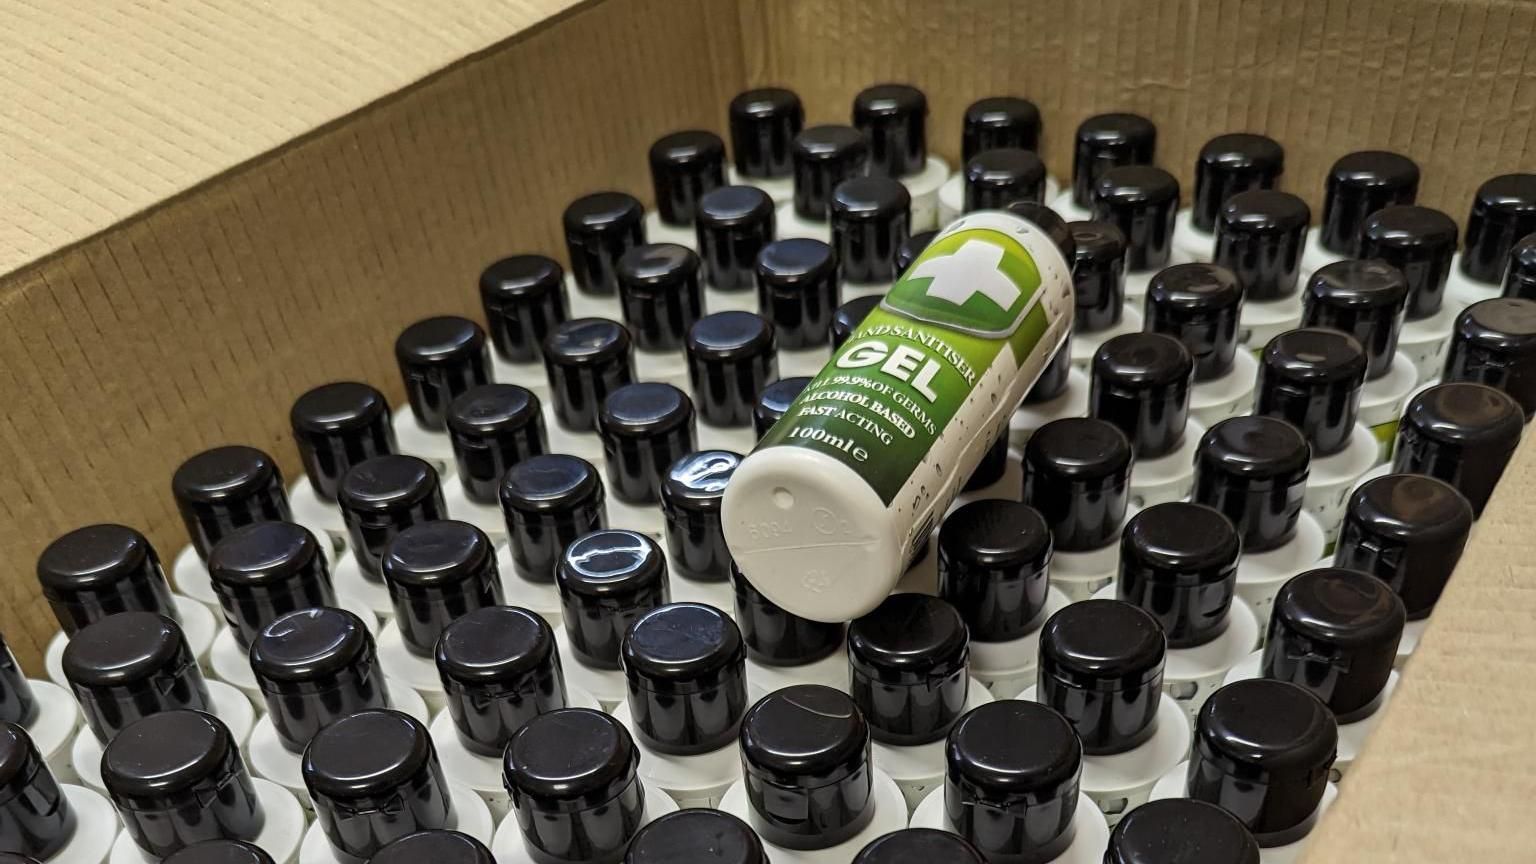 A picture shows a cardboard box containing plastic bottles of the seized counterfeit hand sanitiser.